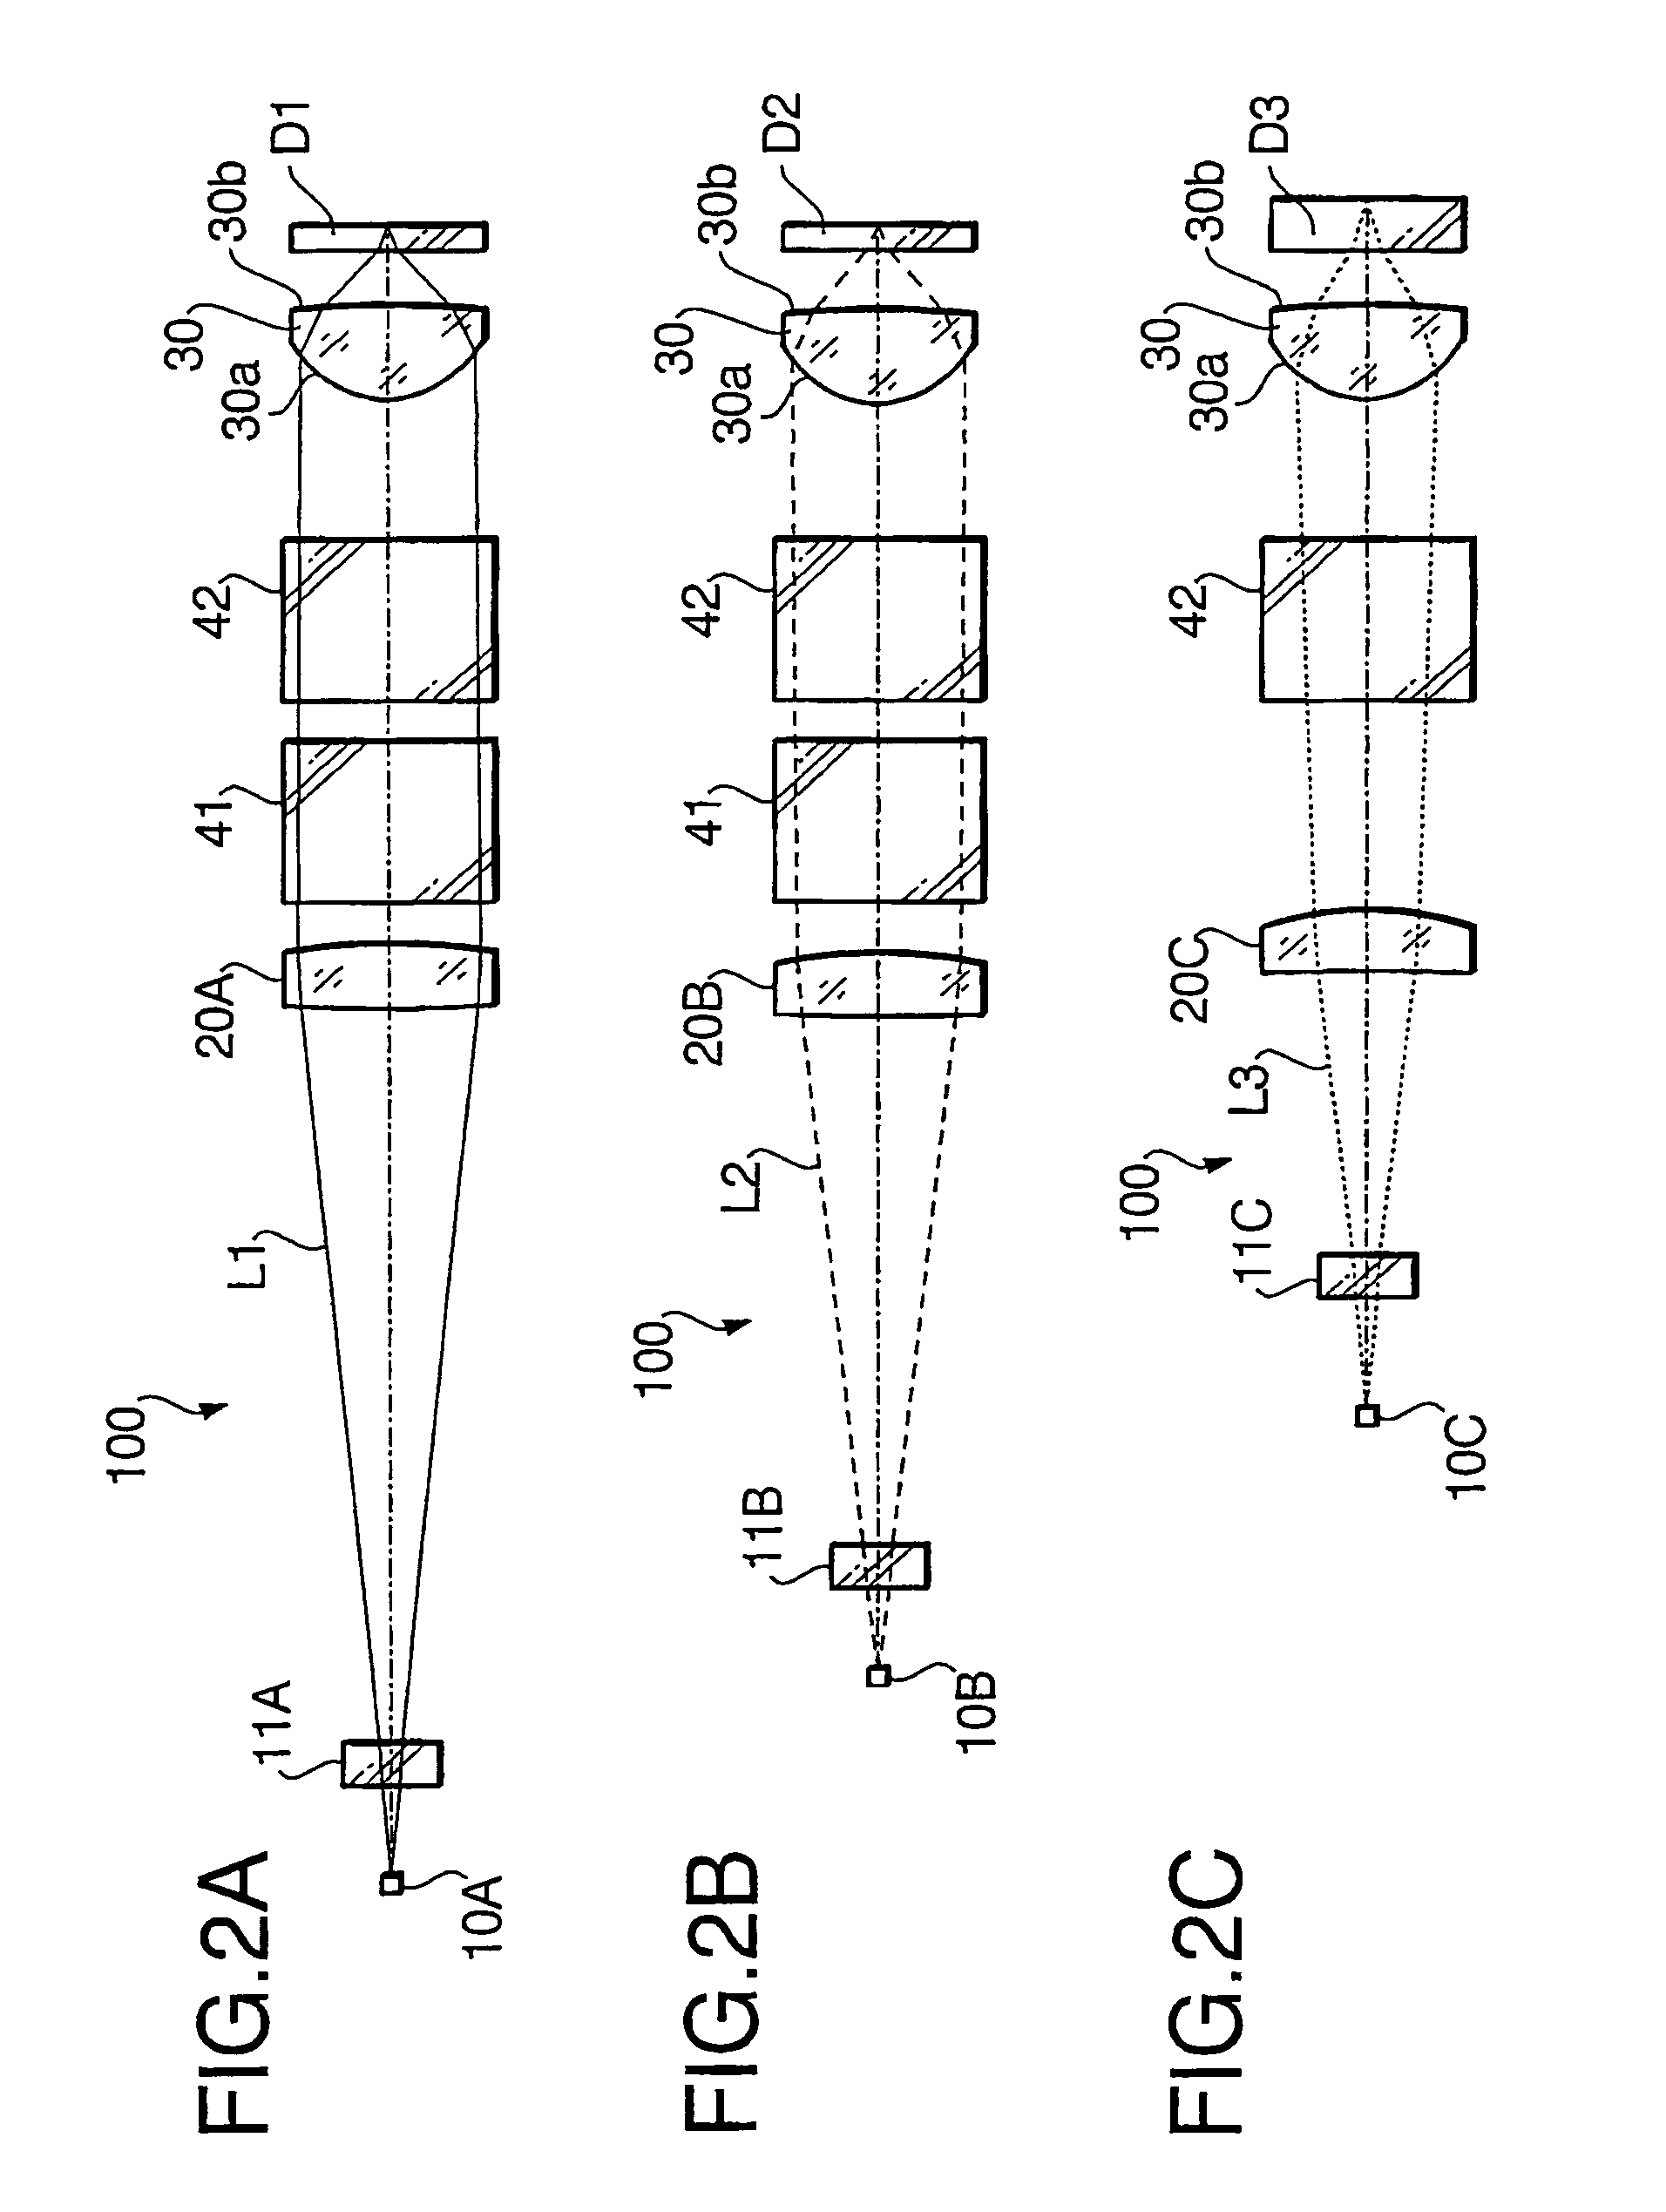 Optical pick-up and objective lens for use with different types of optical discs